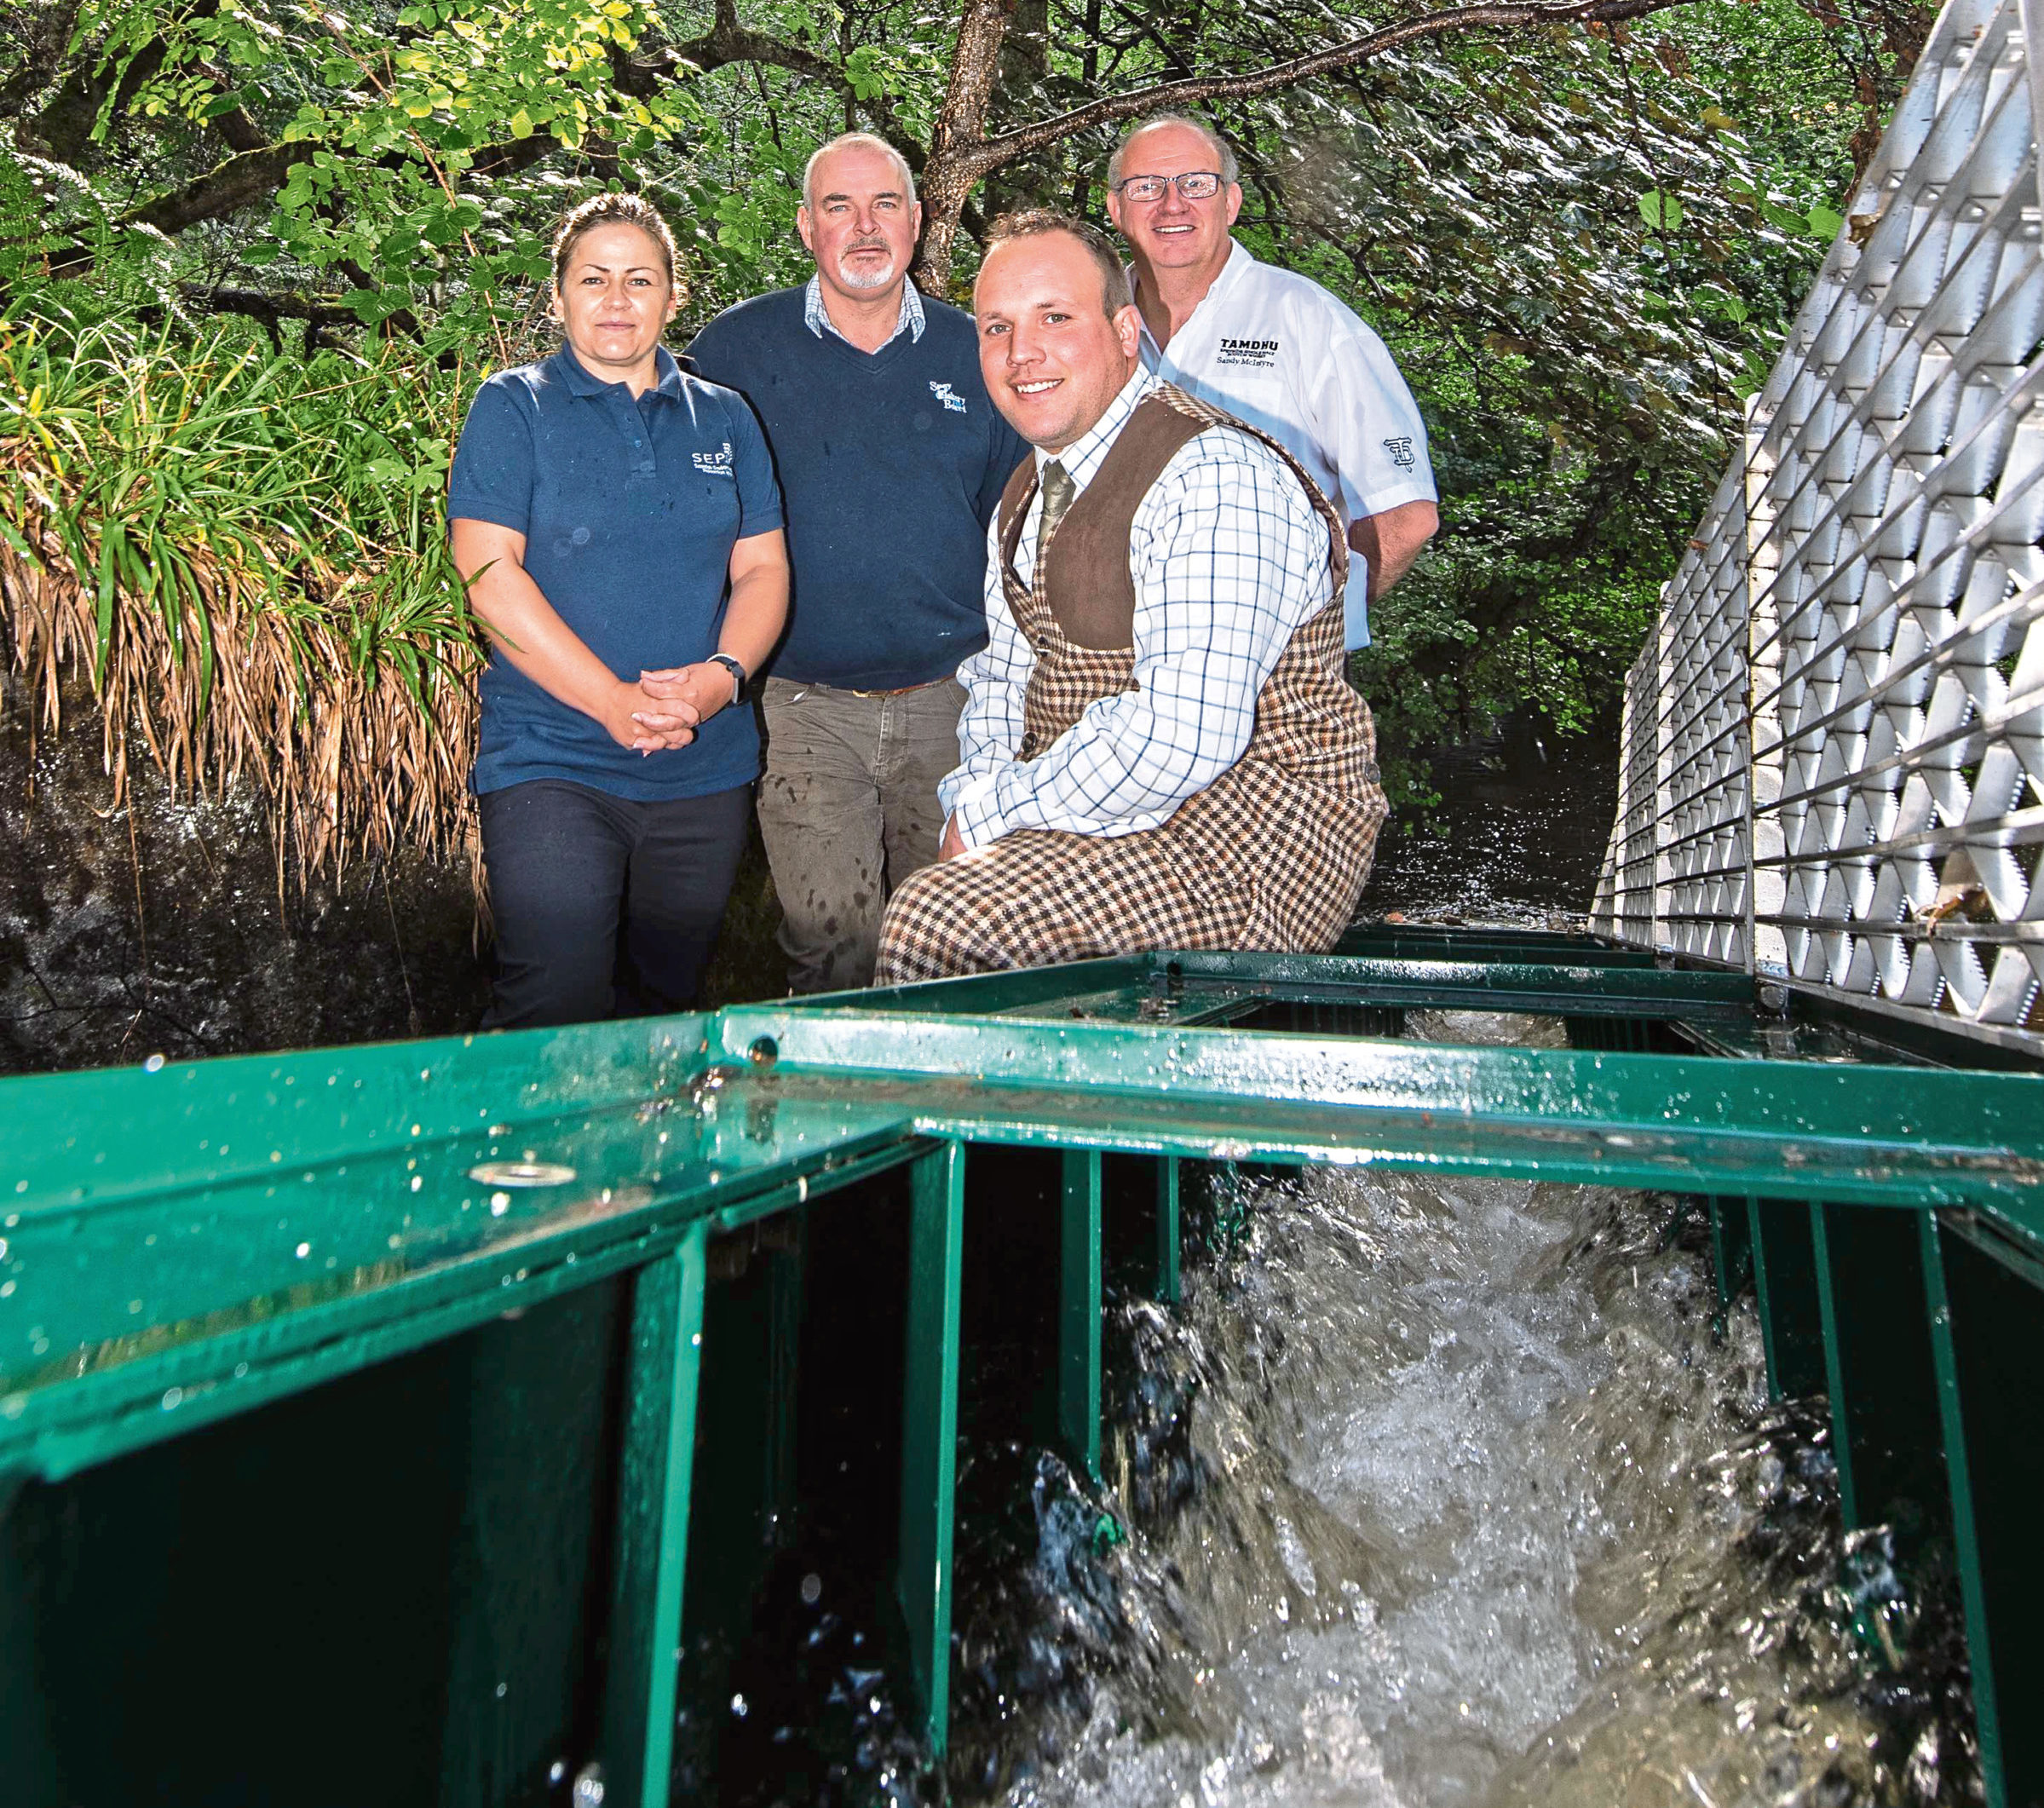 Tamdhu Distillery are teaming up with fisheries experts to reintroduce salmon and trout to the Knockando Burn